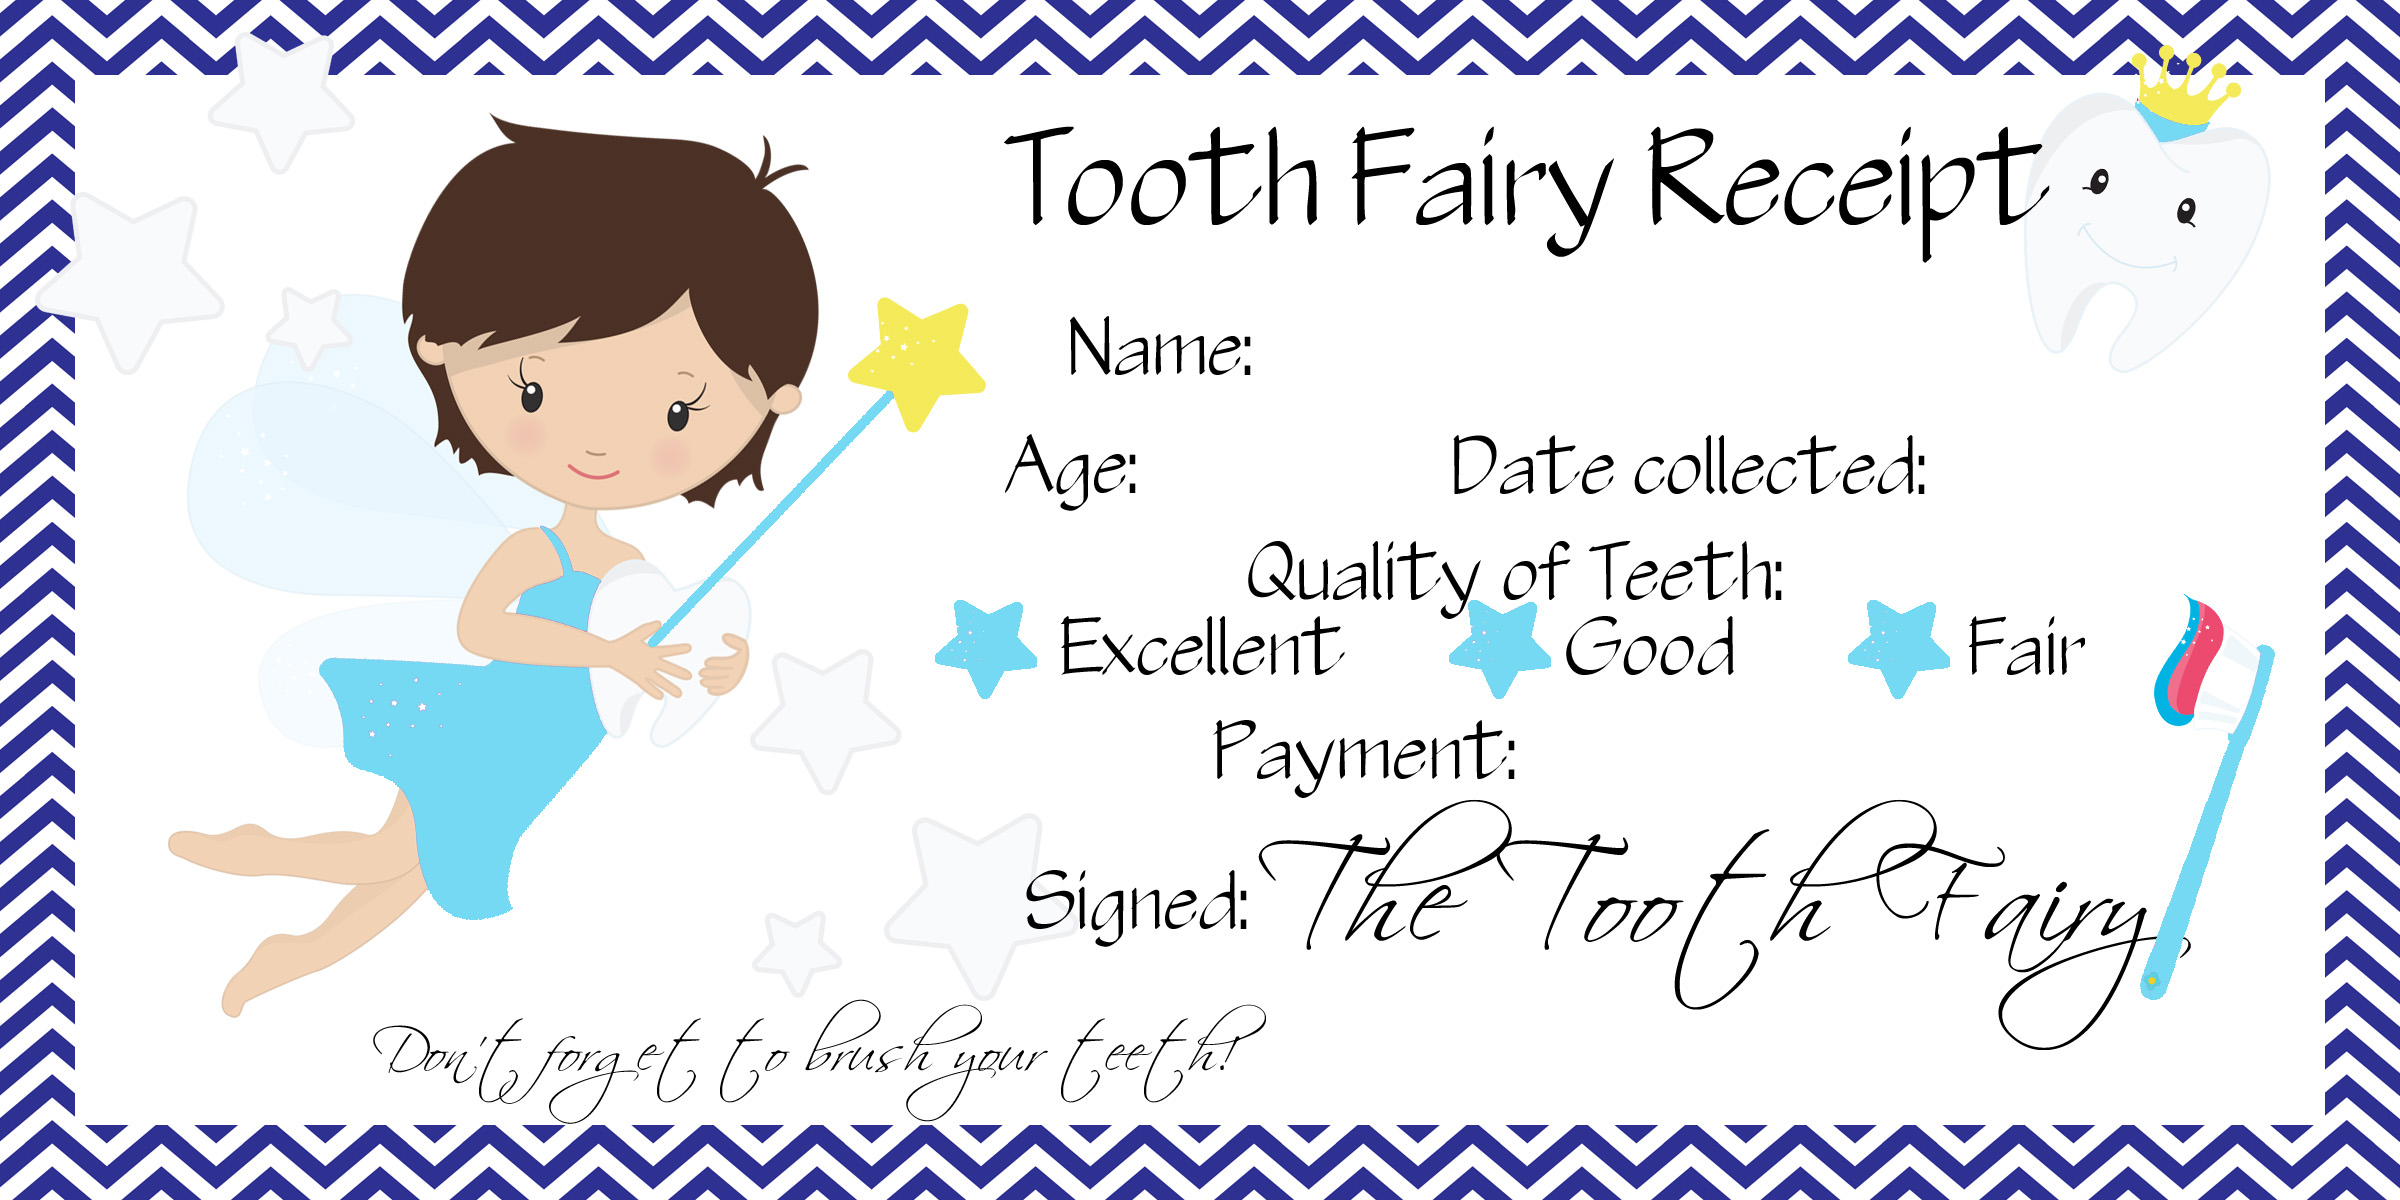 O's first lost tooth Tooth Fairy Receipt Free printable